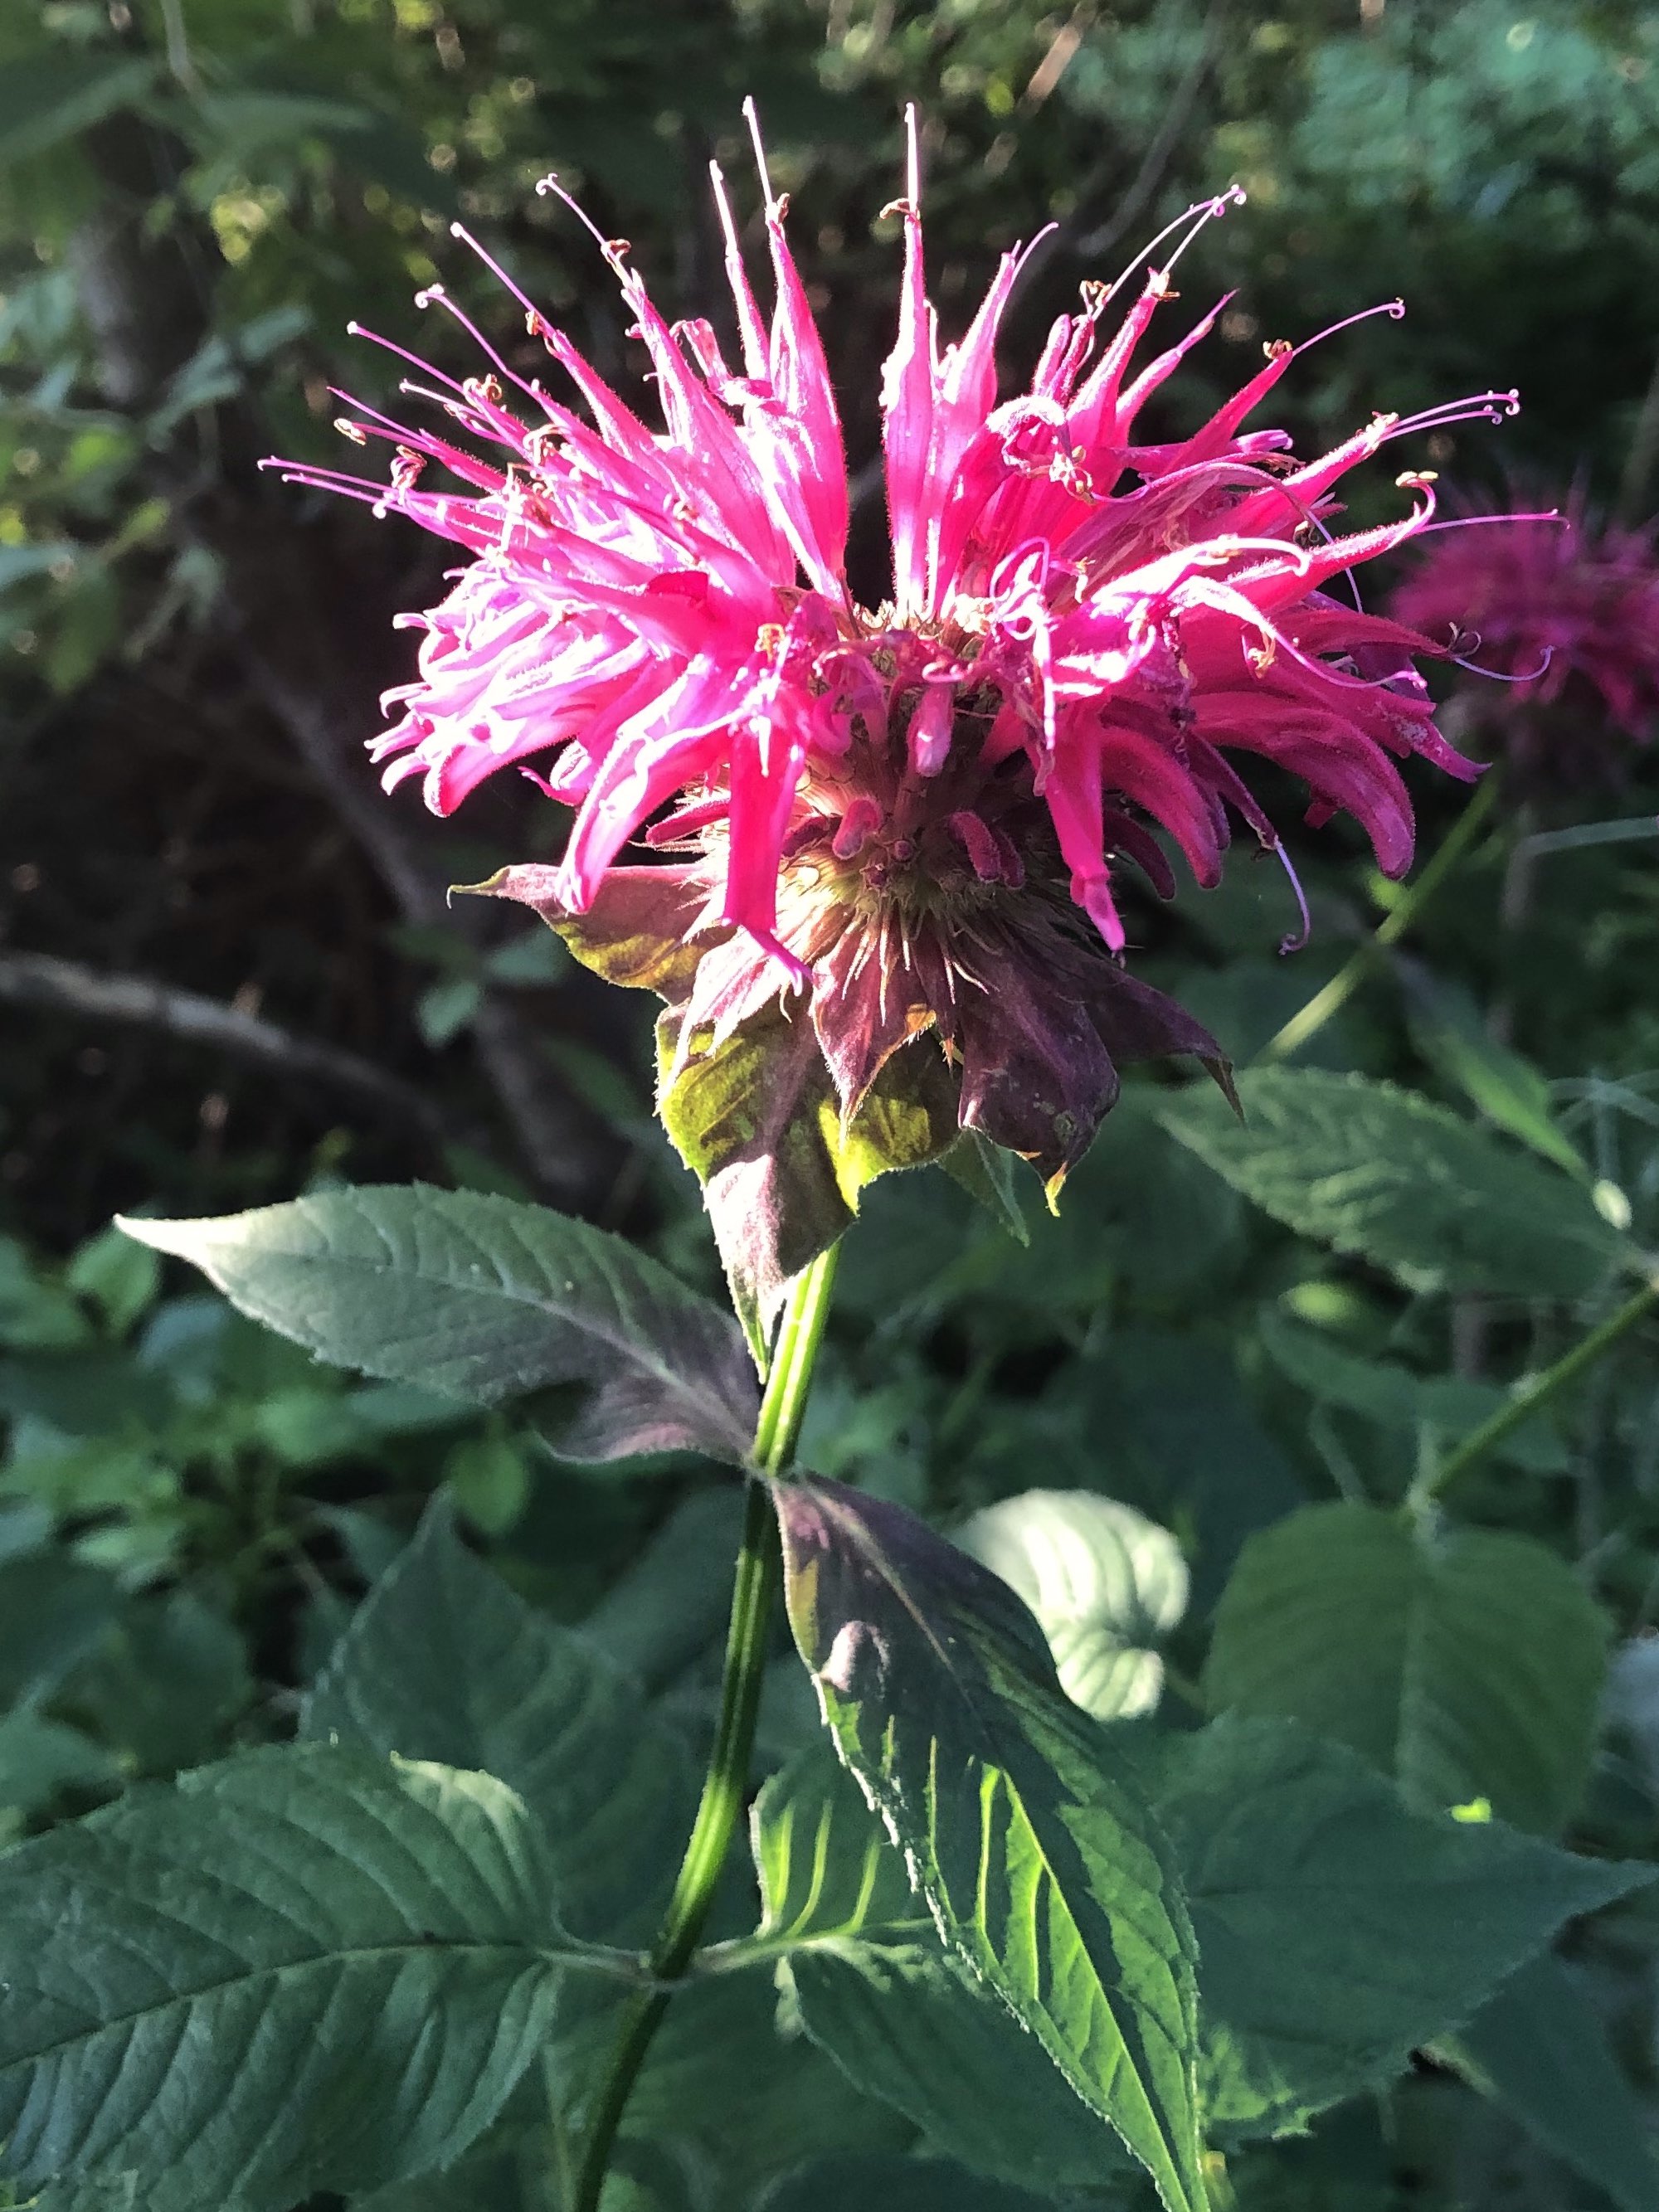 Beebalm along bike path between Duck Pond and Marion Dunn Prairiein Madison, Wisconsin on July 14, 2020.